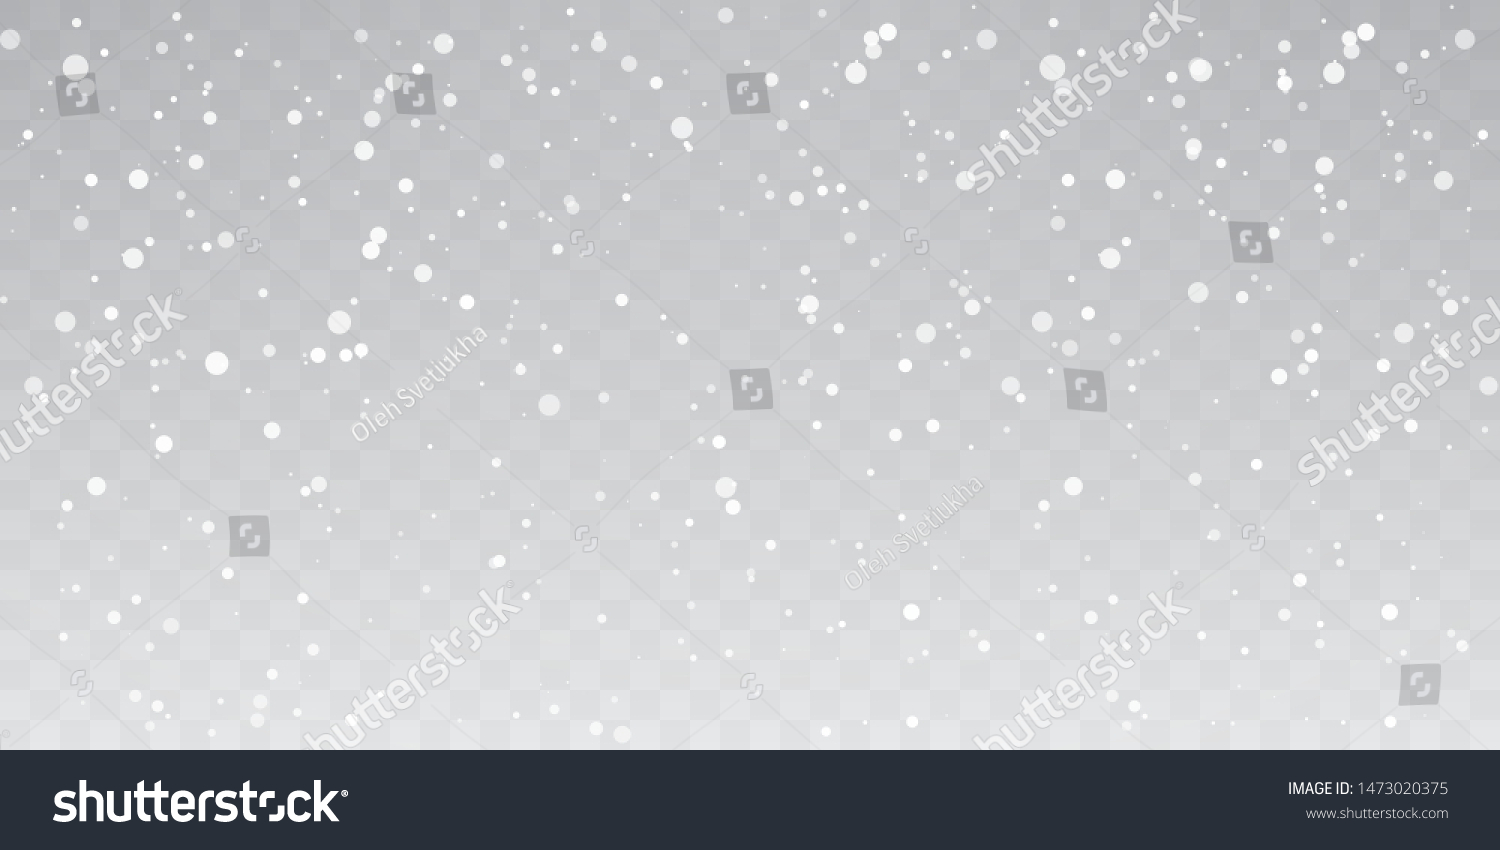 Christmas snow. Heavy snowfall. Falling snowflakes on transparent background. White snowflakes flying in the air. Vector illustration. #1473020375